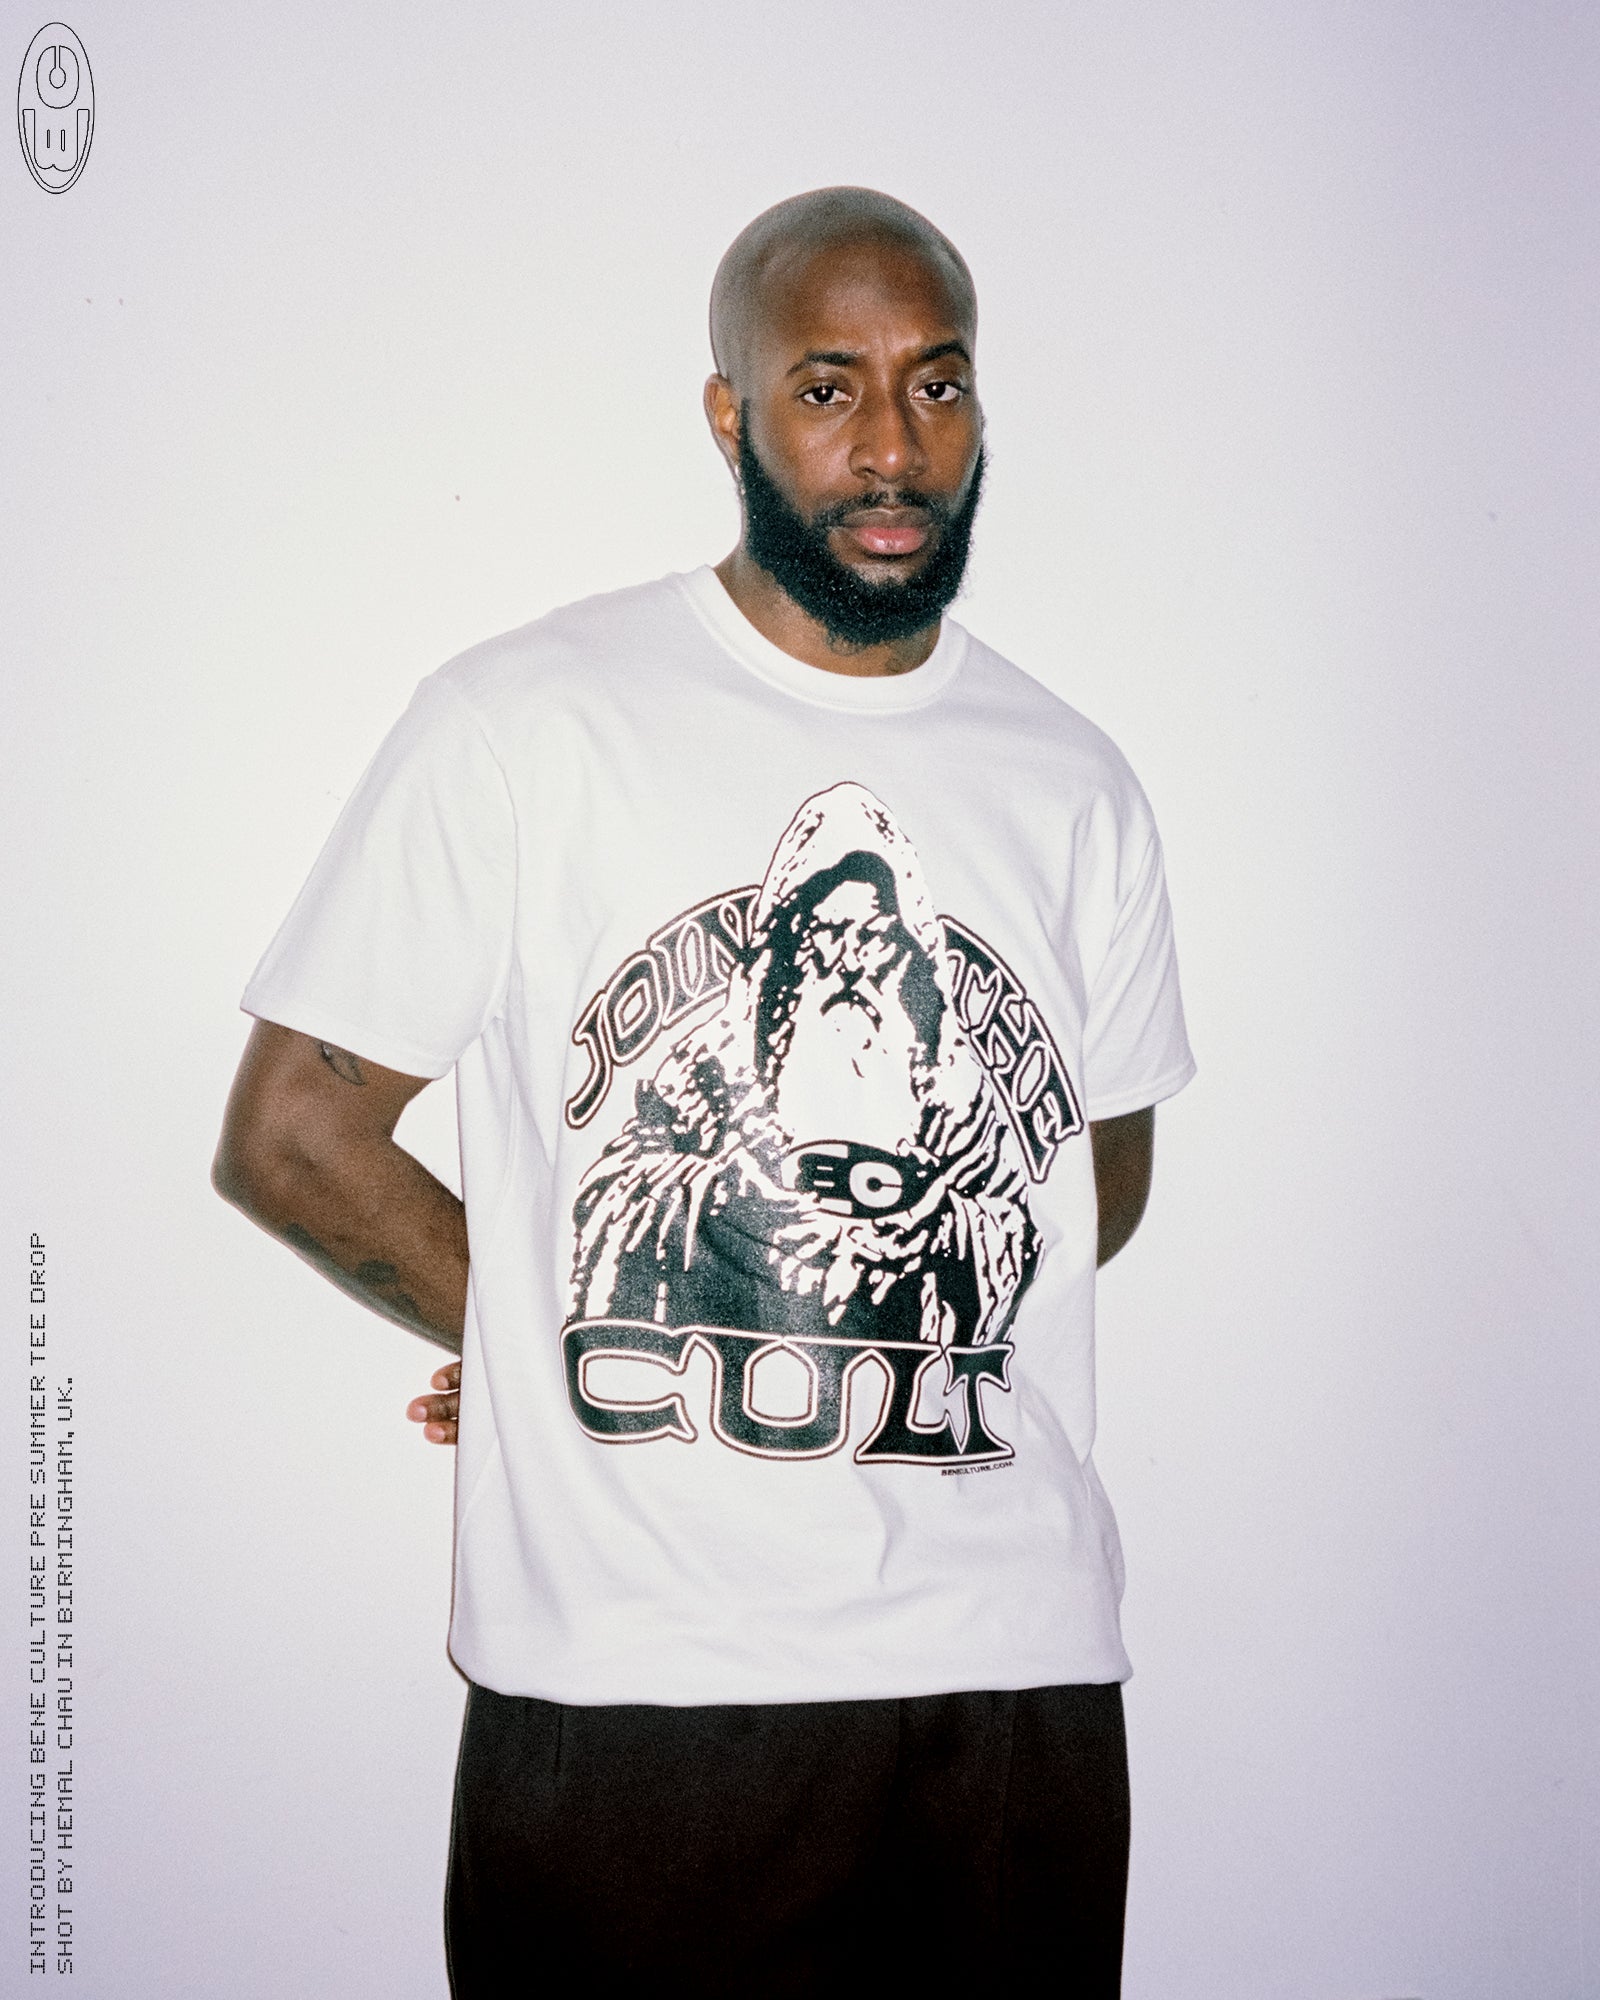 Join the Cult T-Shirt (White)